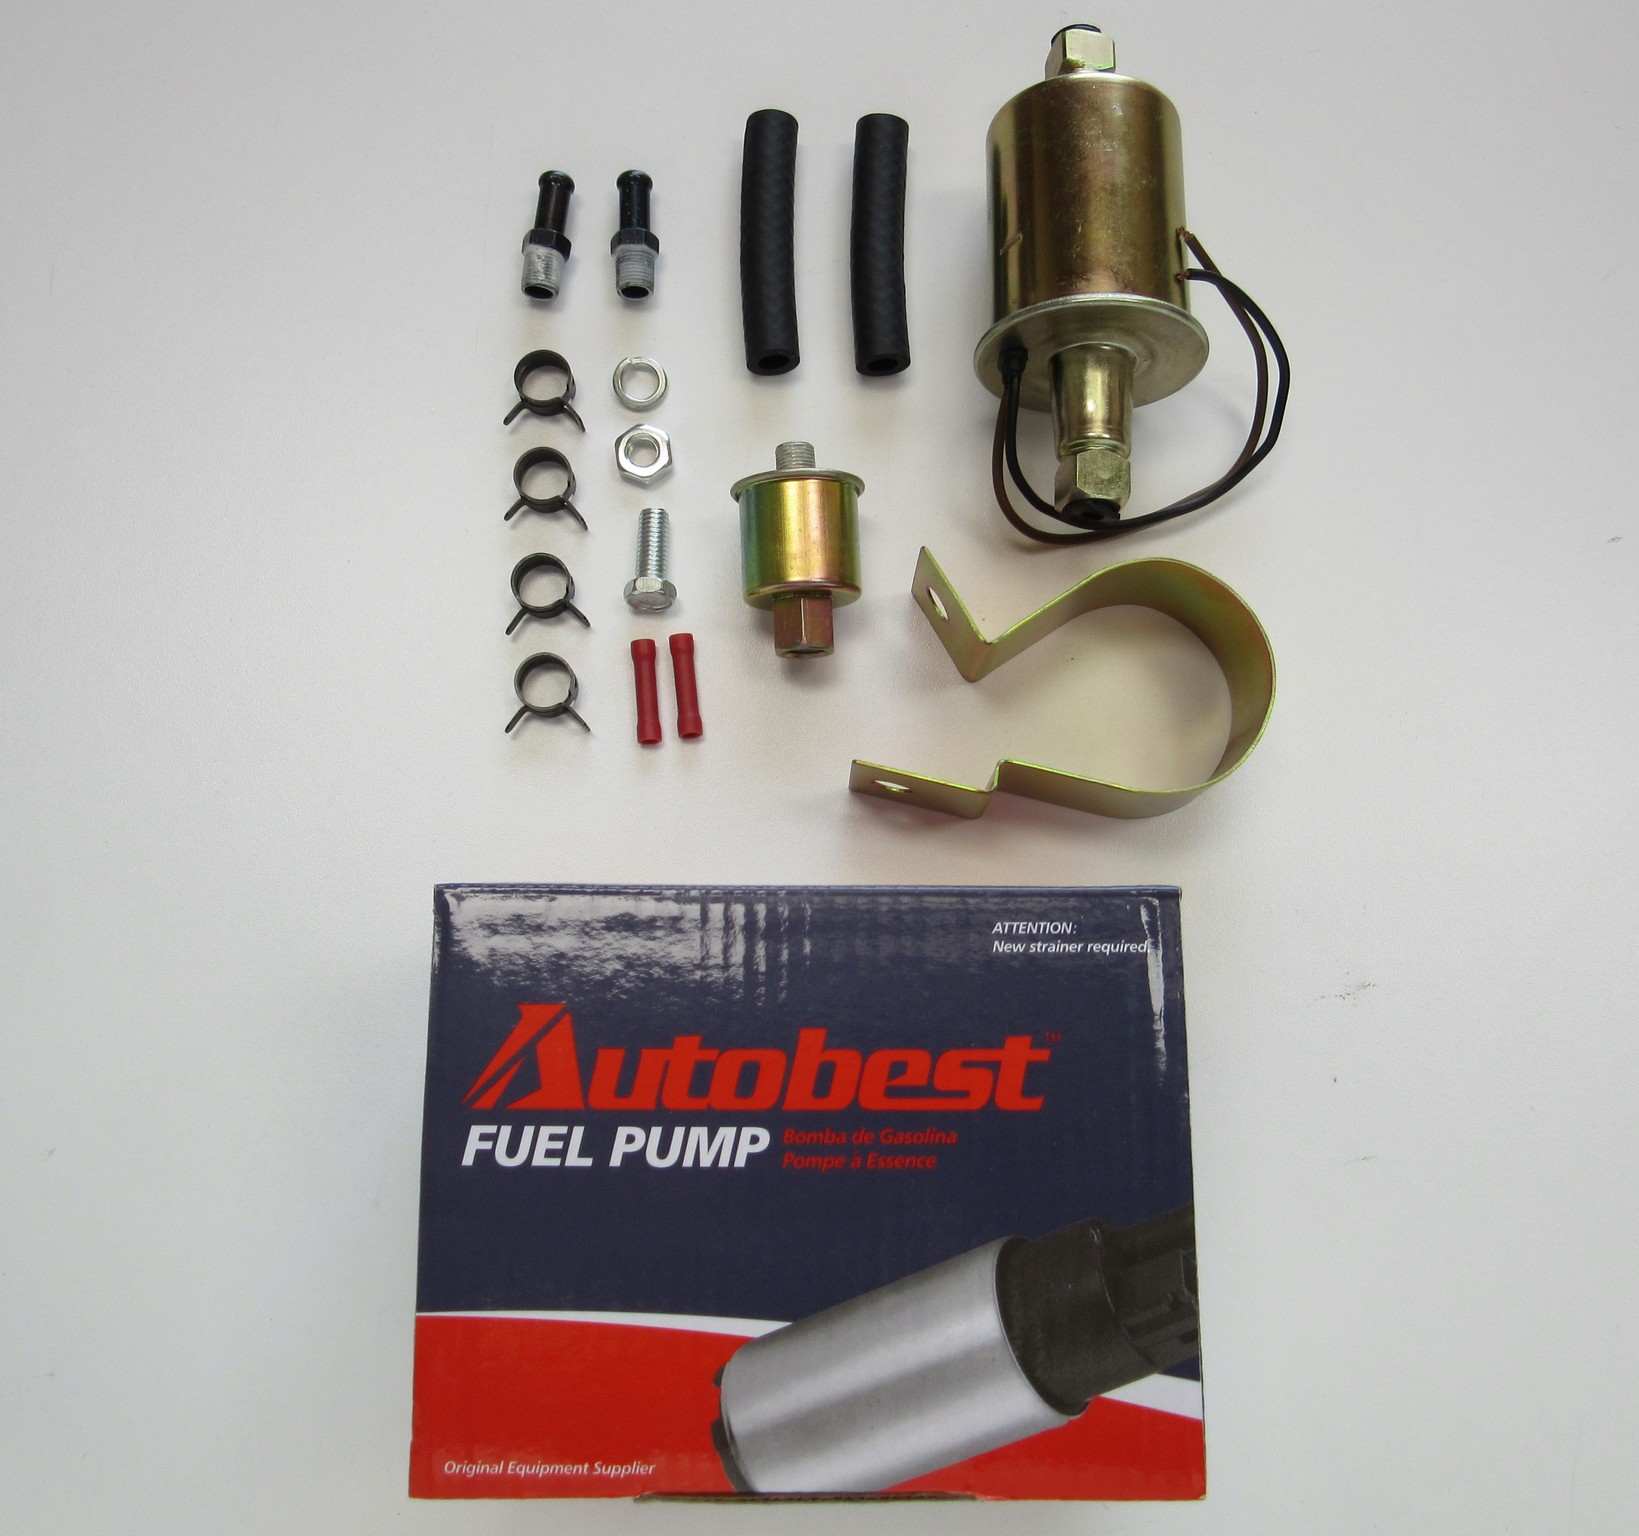 Package View of Electric Fuel Pump AUTOBEST F4027